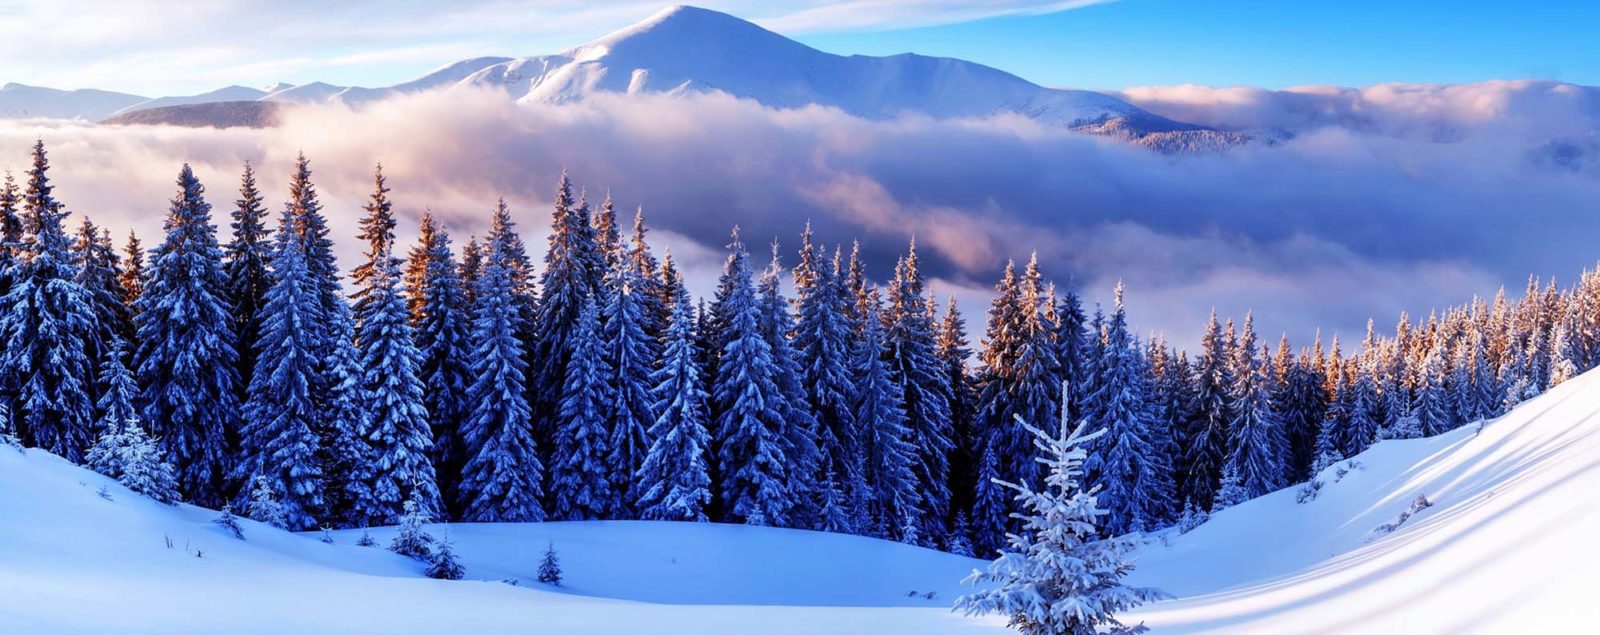 Winter snow in mountainous forest, clouds and mountain-tops beyond